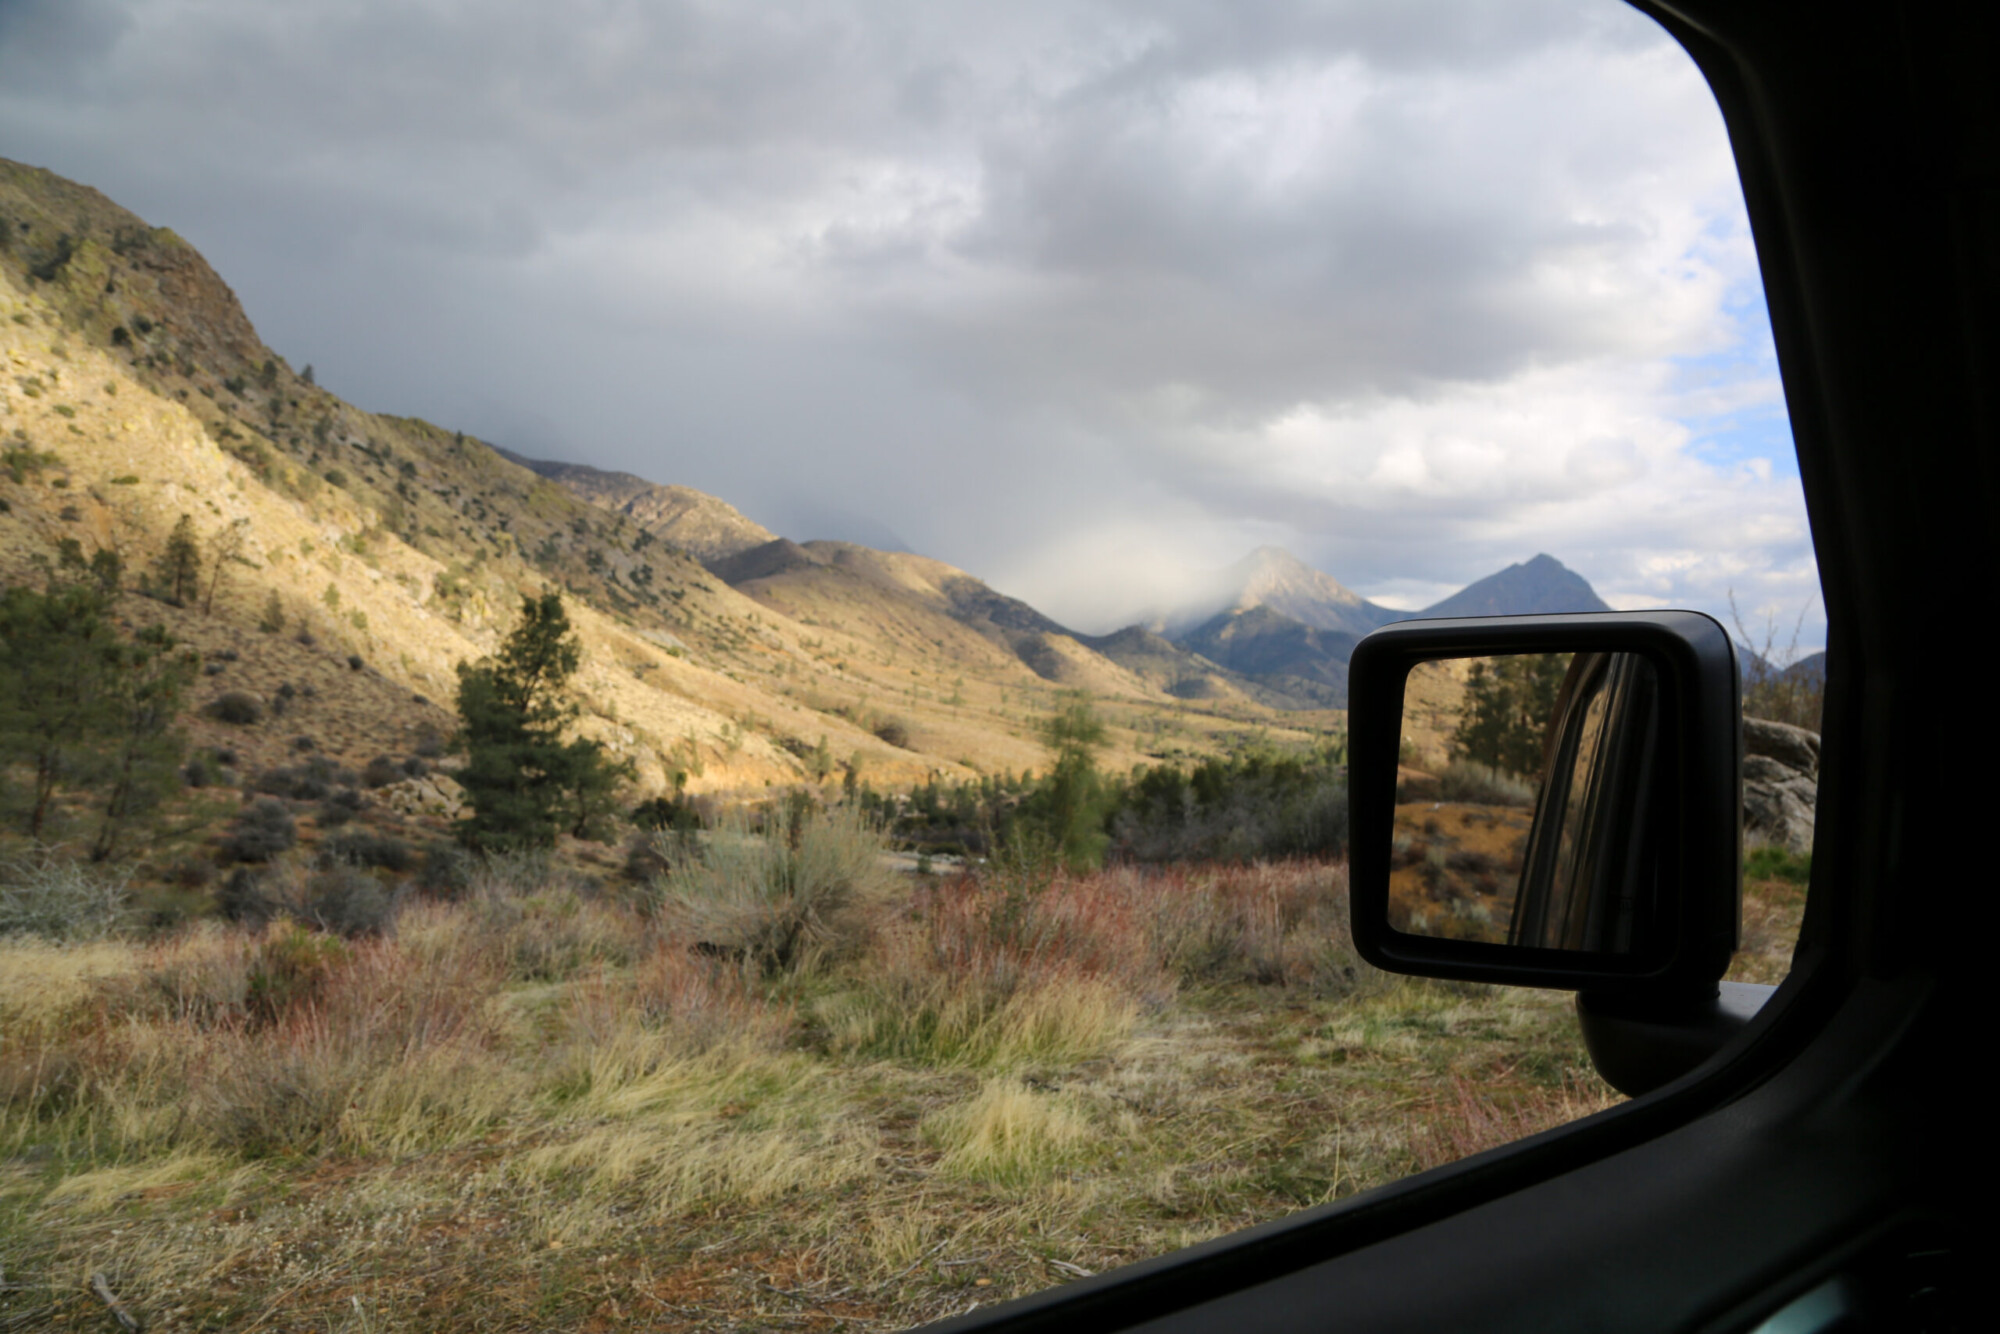 Photo through a vehicle window at an arid hilly landscape taken while off-roading near Kernville, California.